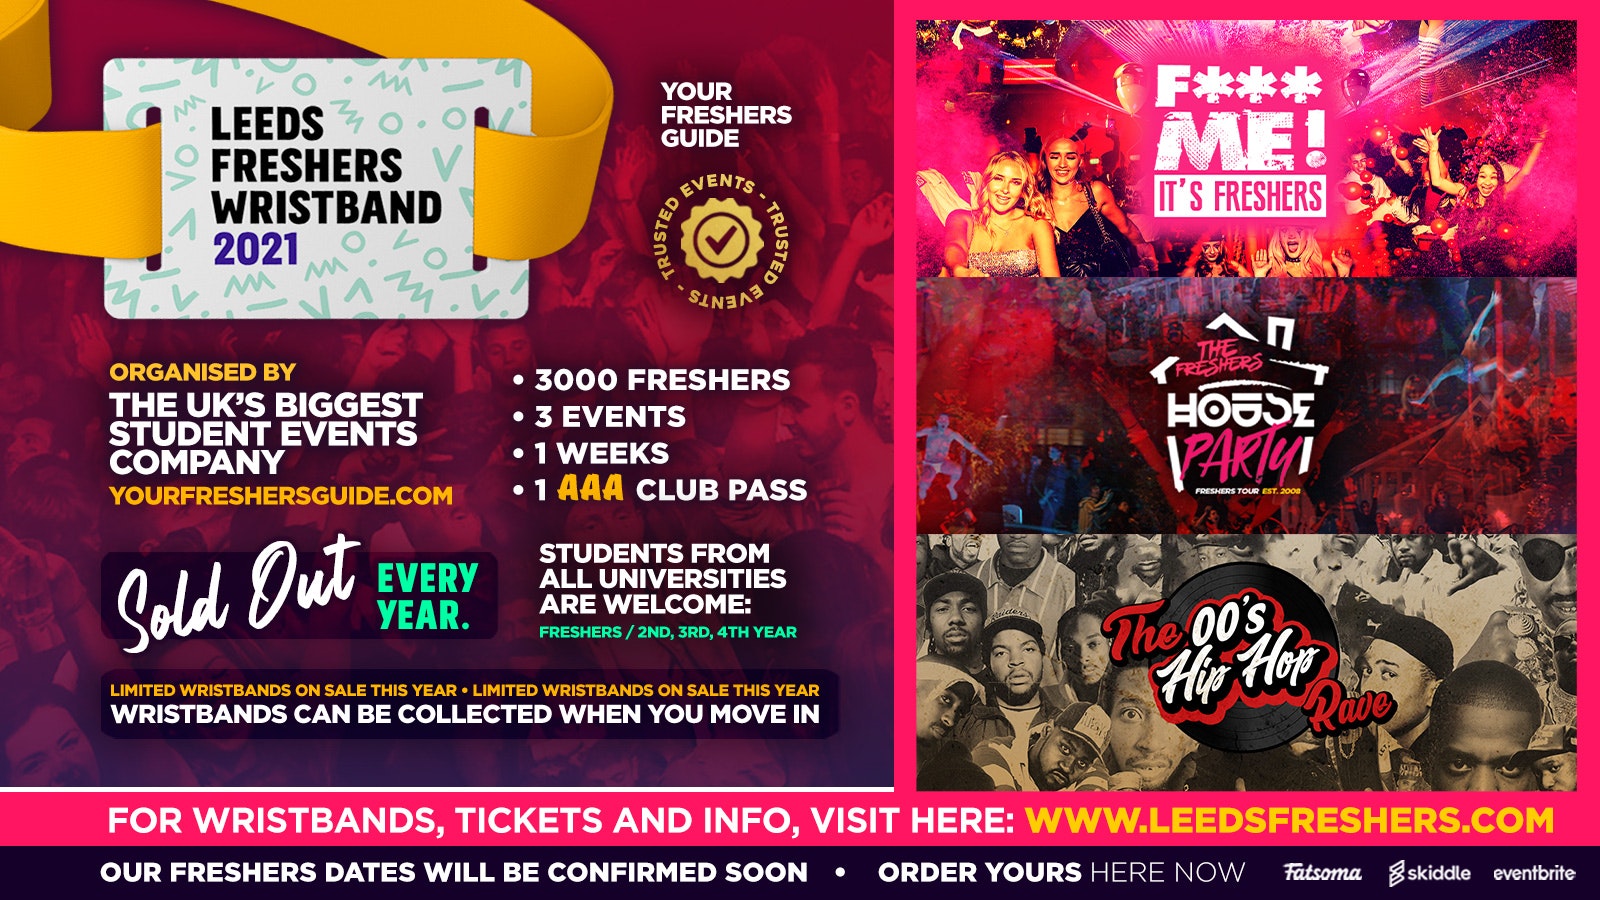 Leeds Freshers Wristband 2021 – The Official Freshers Pass | Includes the biggest events in Leeds